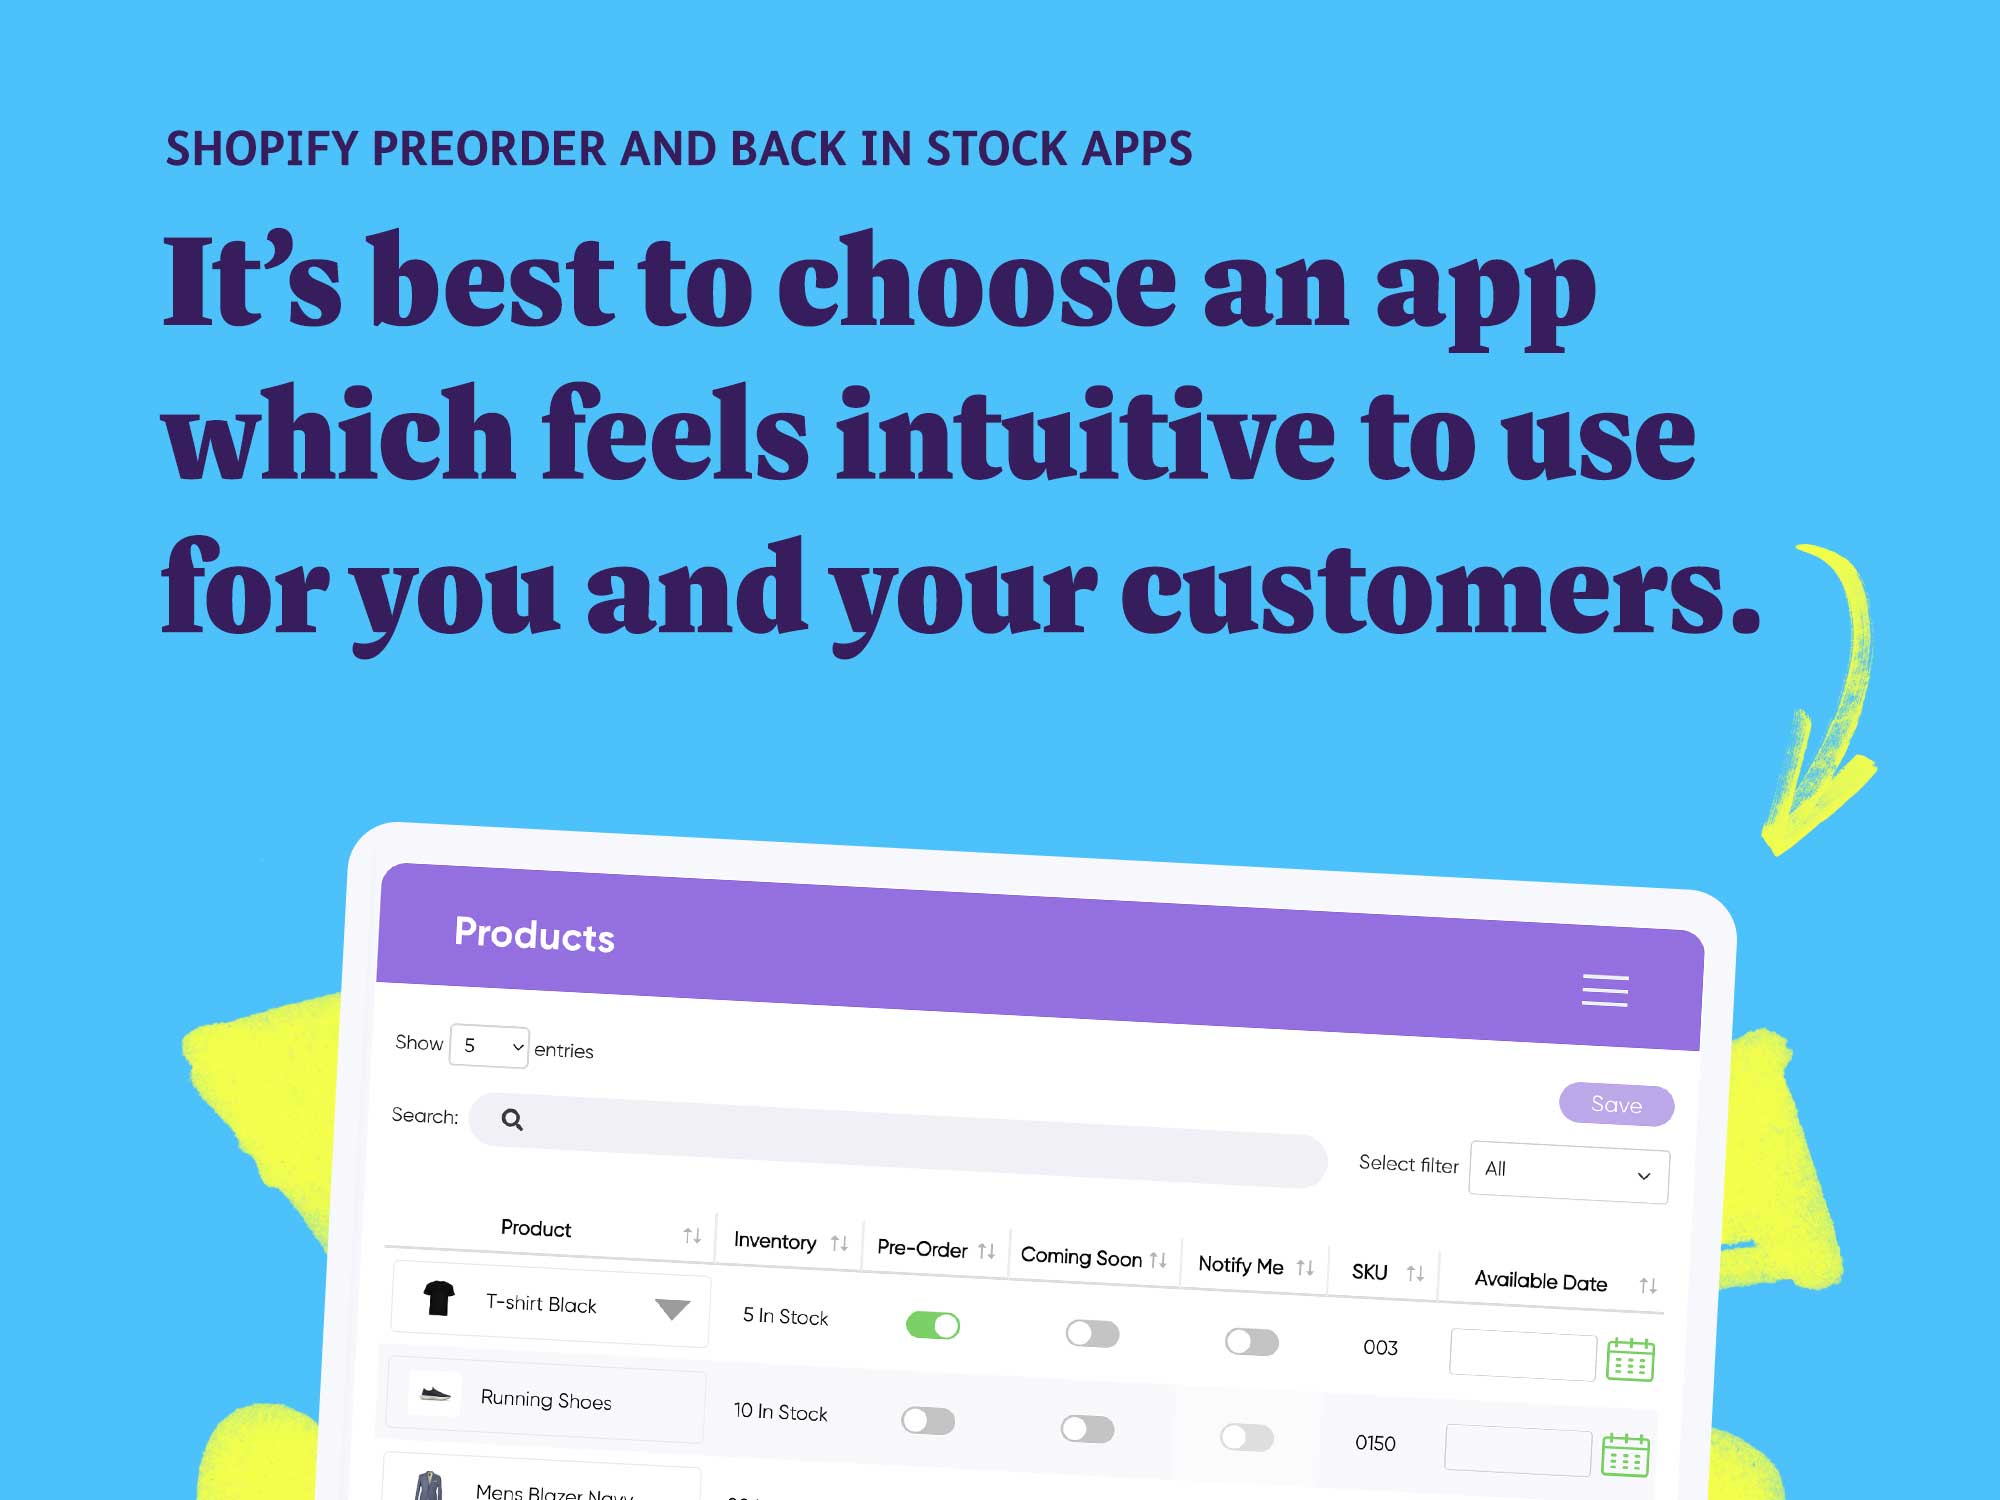 Shopify preorder and back in stock apps: It’s best to choose an app which feels intuitive to use for you and your customers.